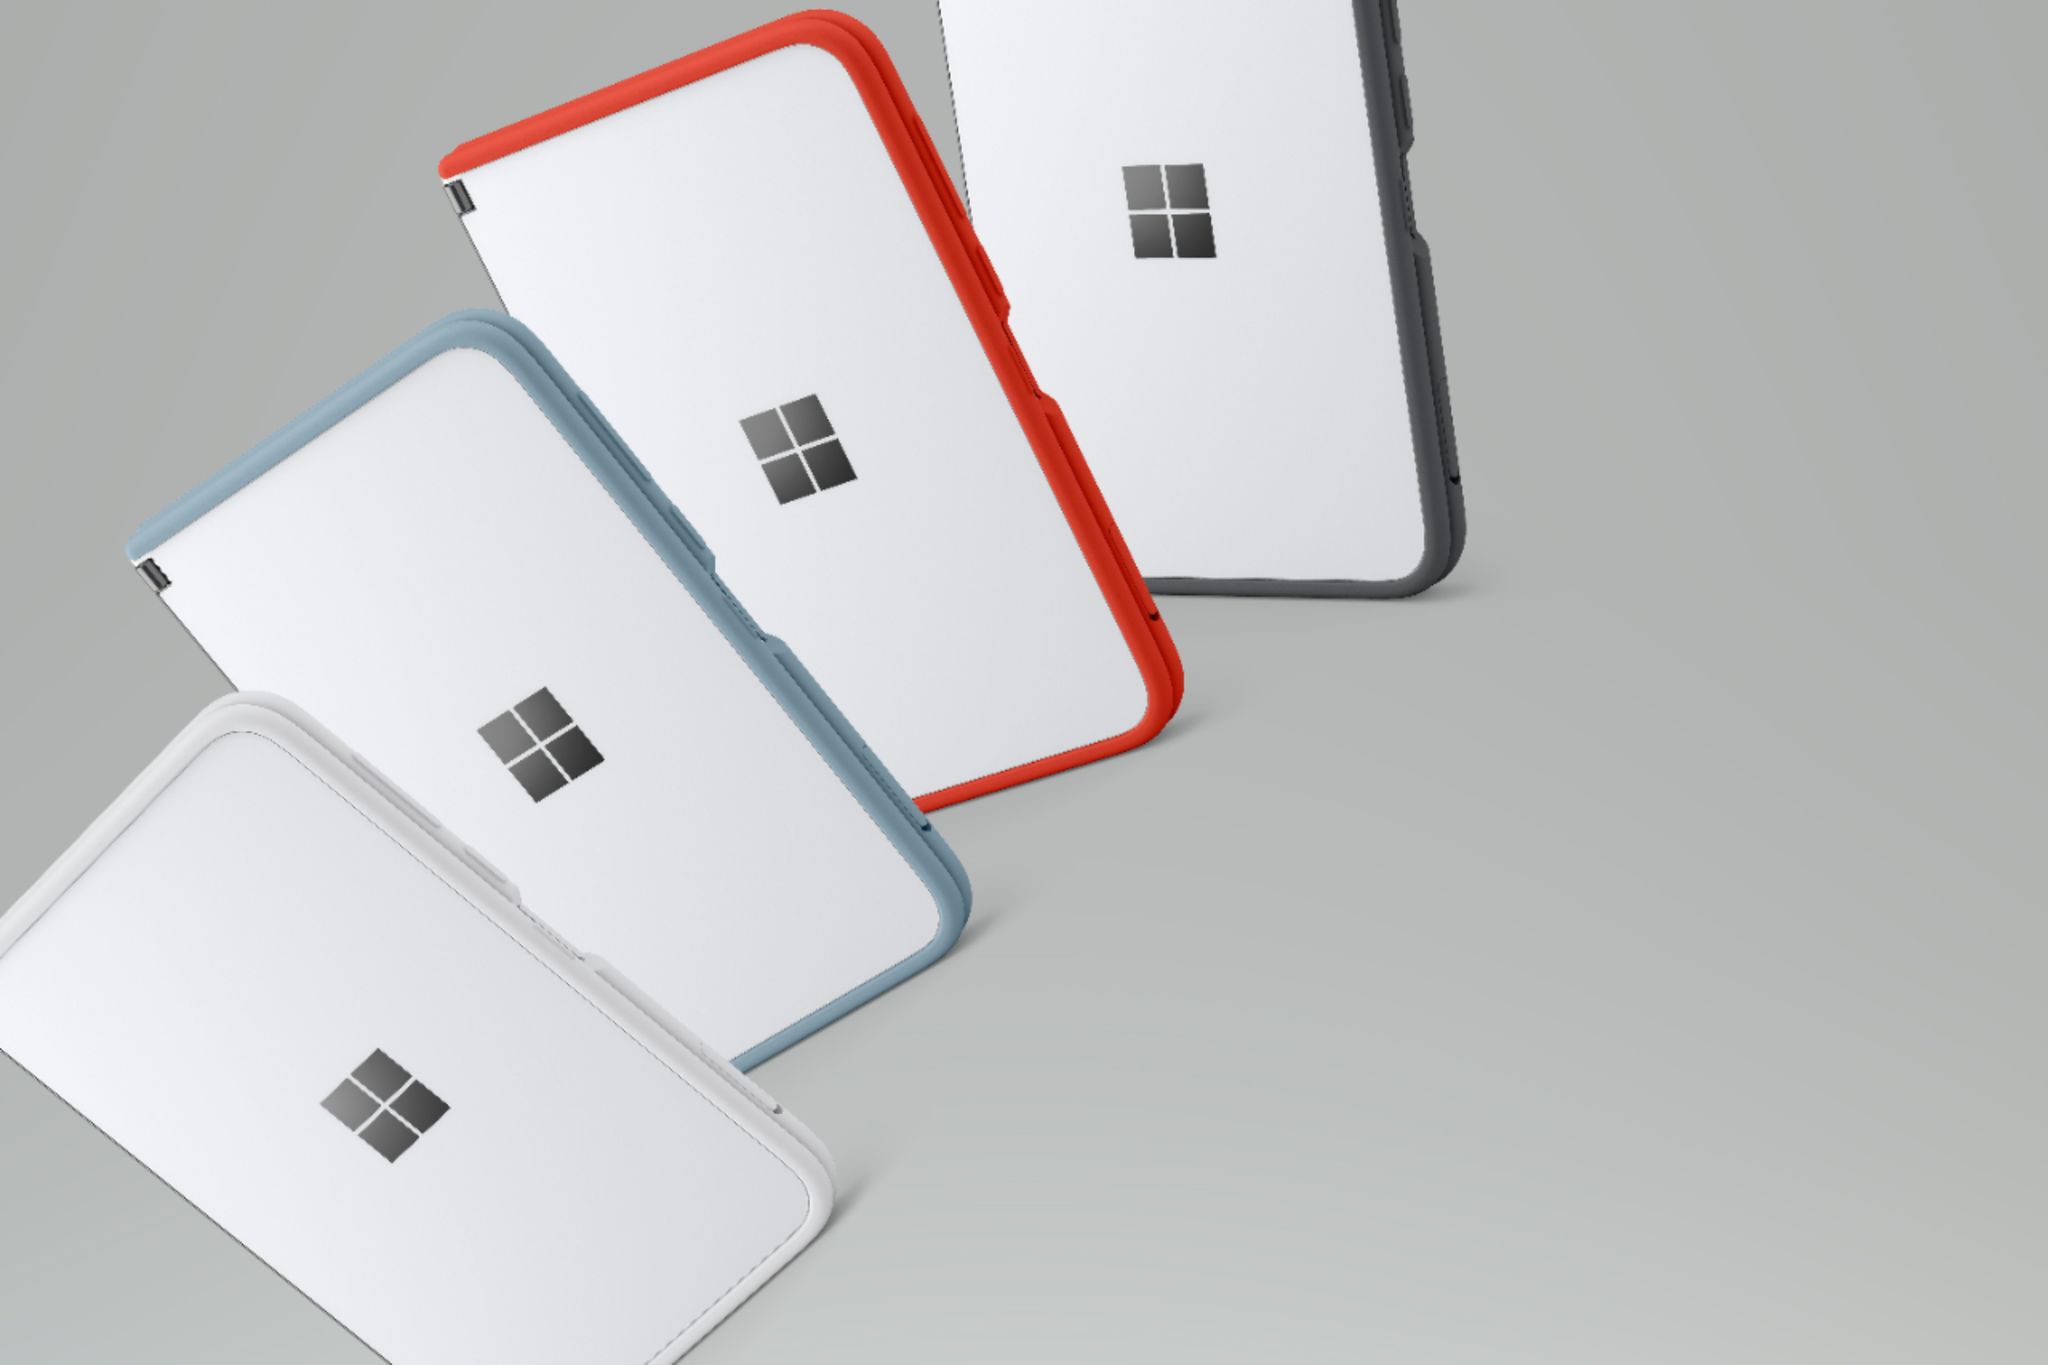 https://www.windowscentral.com/sites/wpcentral.com/files/styles/larger/public/field/image/2020/09/surface-duo-bumper-color-listing-best-buy.jpg